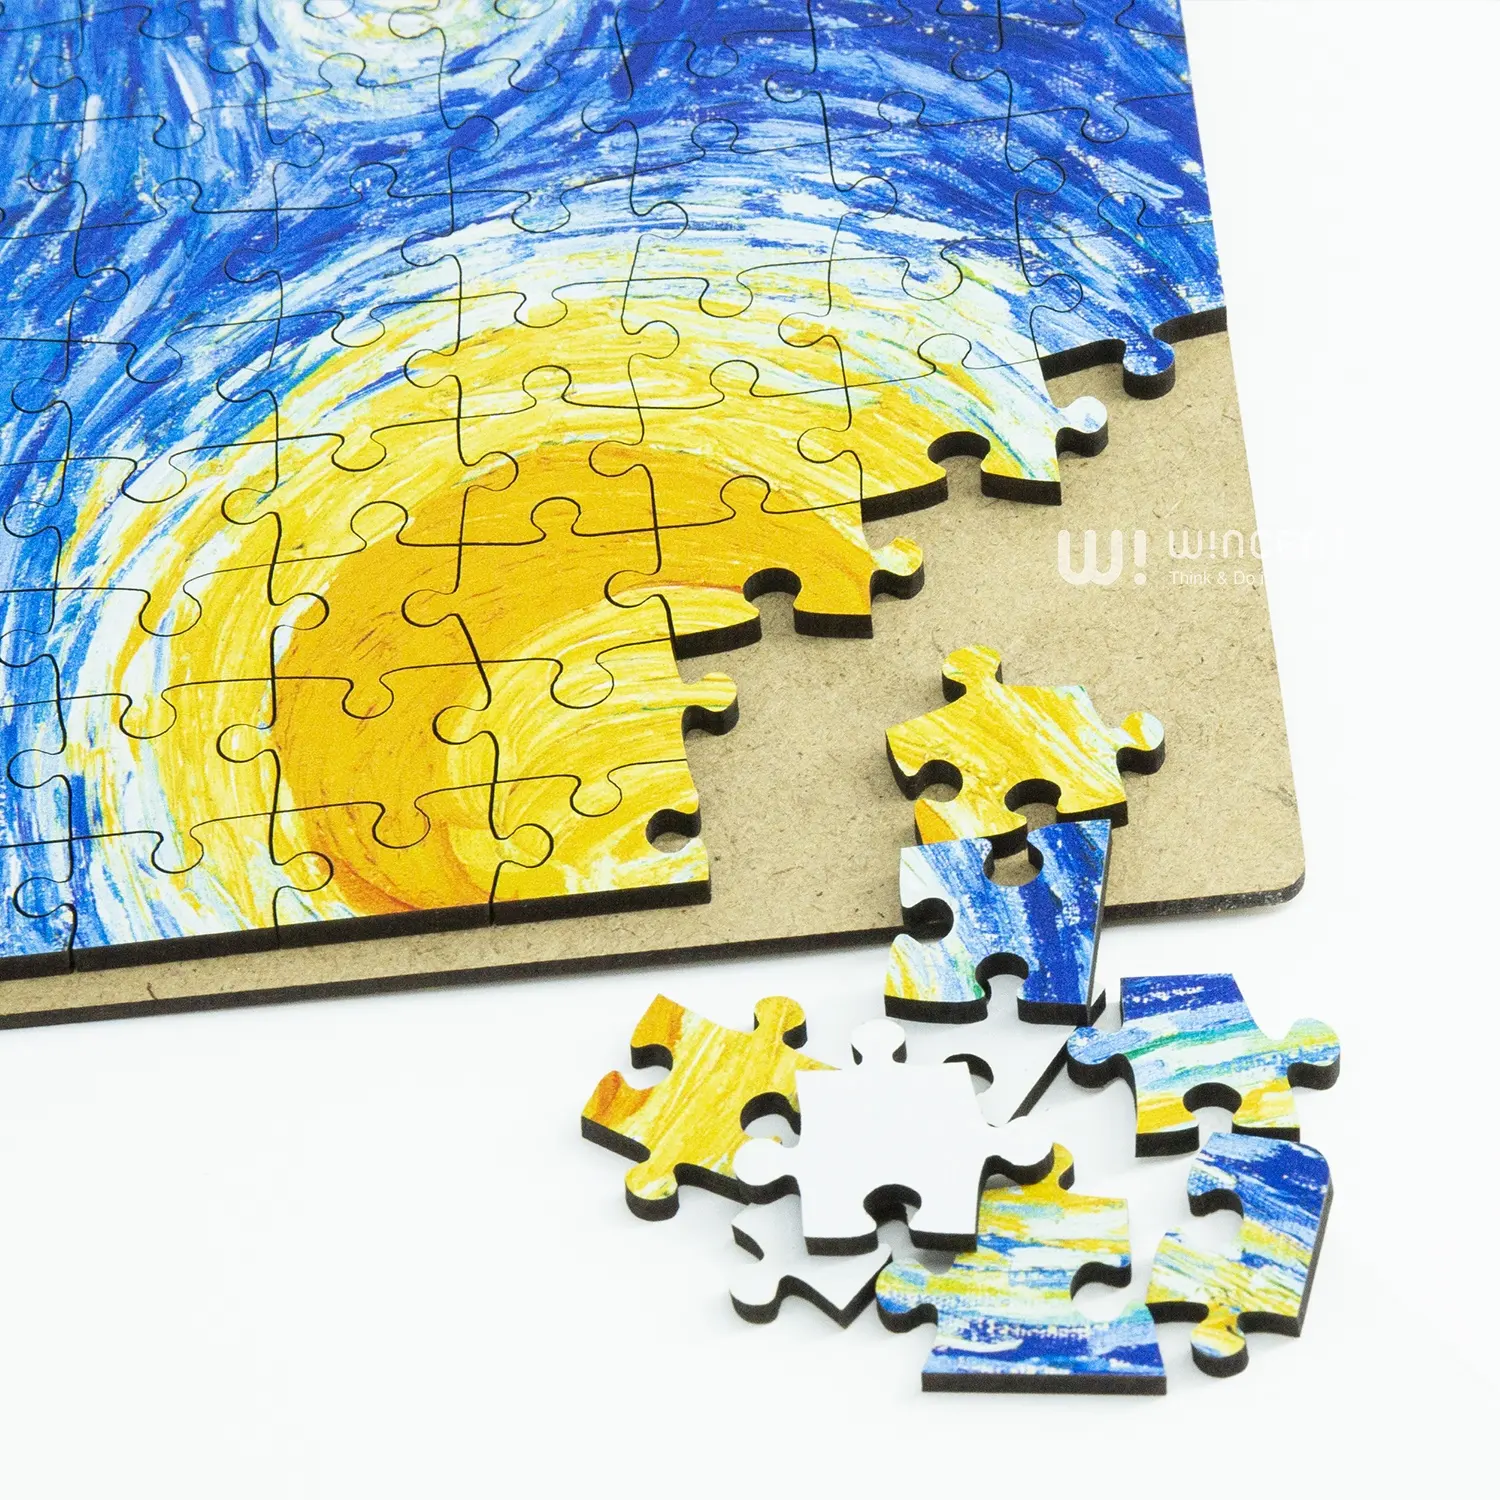 1500pieces Custom Image Hanging Double Sides Jigsaw Wood Educational Puzzle Toy With Frame For Adult Gift